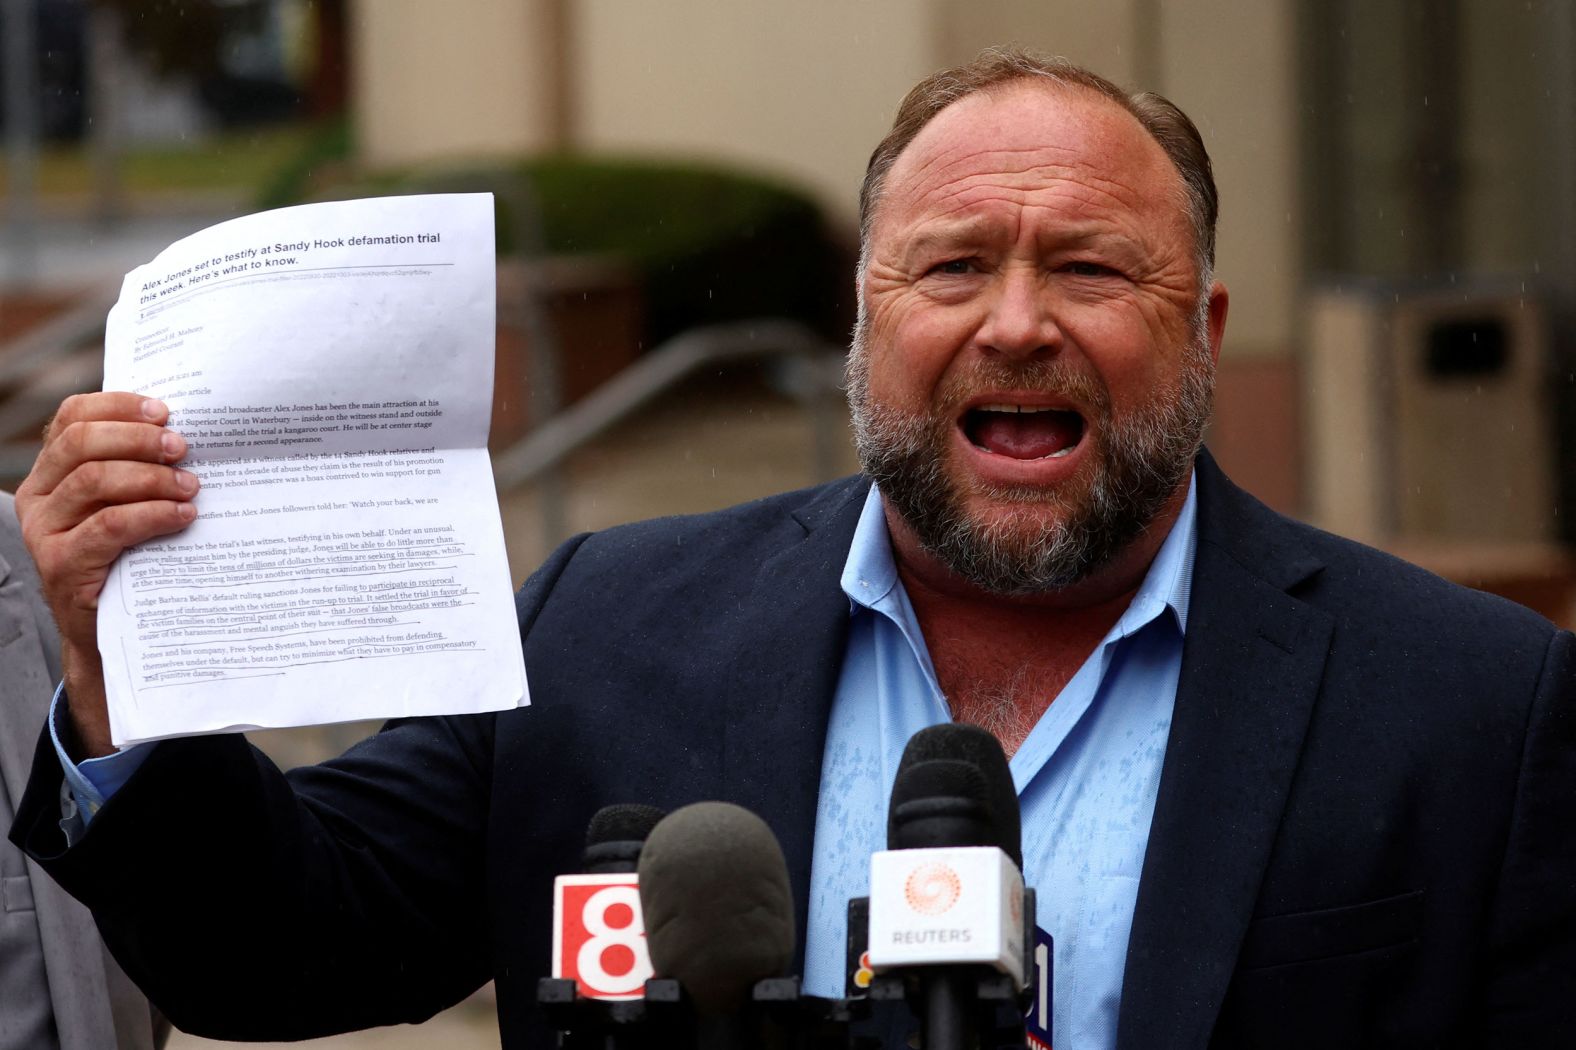 Infowars host and conspiracy theorist Alex Jones speaks to the media after appearing at his Sandy Hook defamation trial in Waterbury, Connecticut, on Tuesday, October 4. The attorneys presented closing arguments in the trial on Thursday.